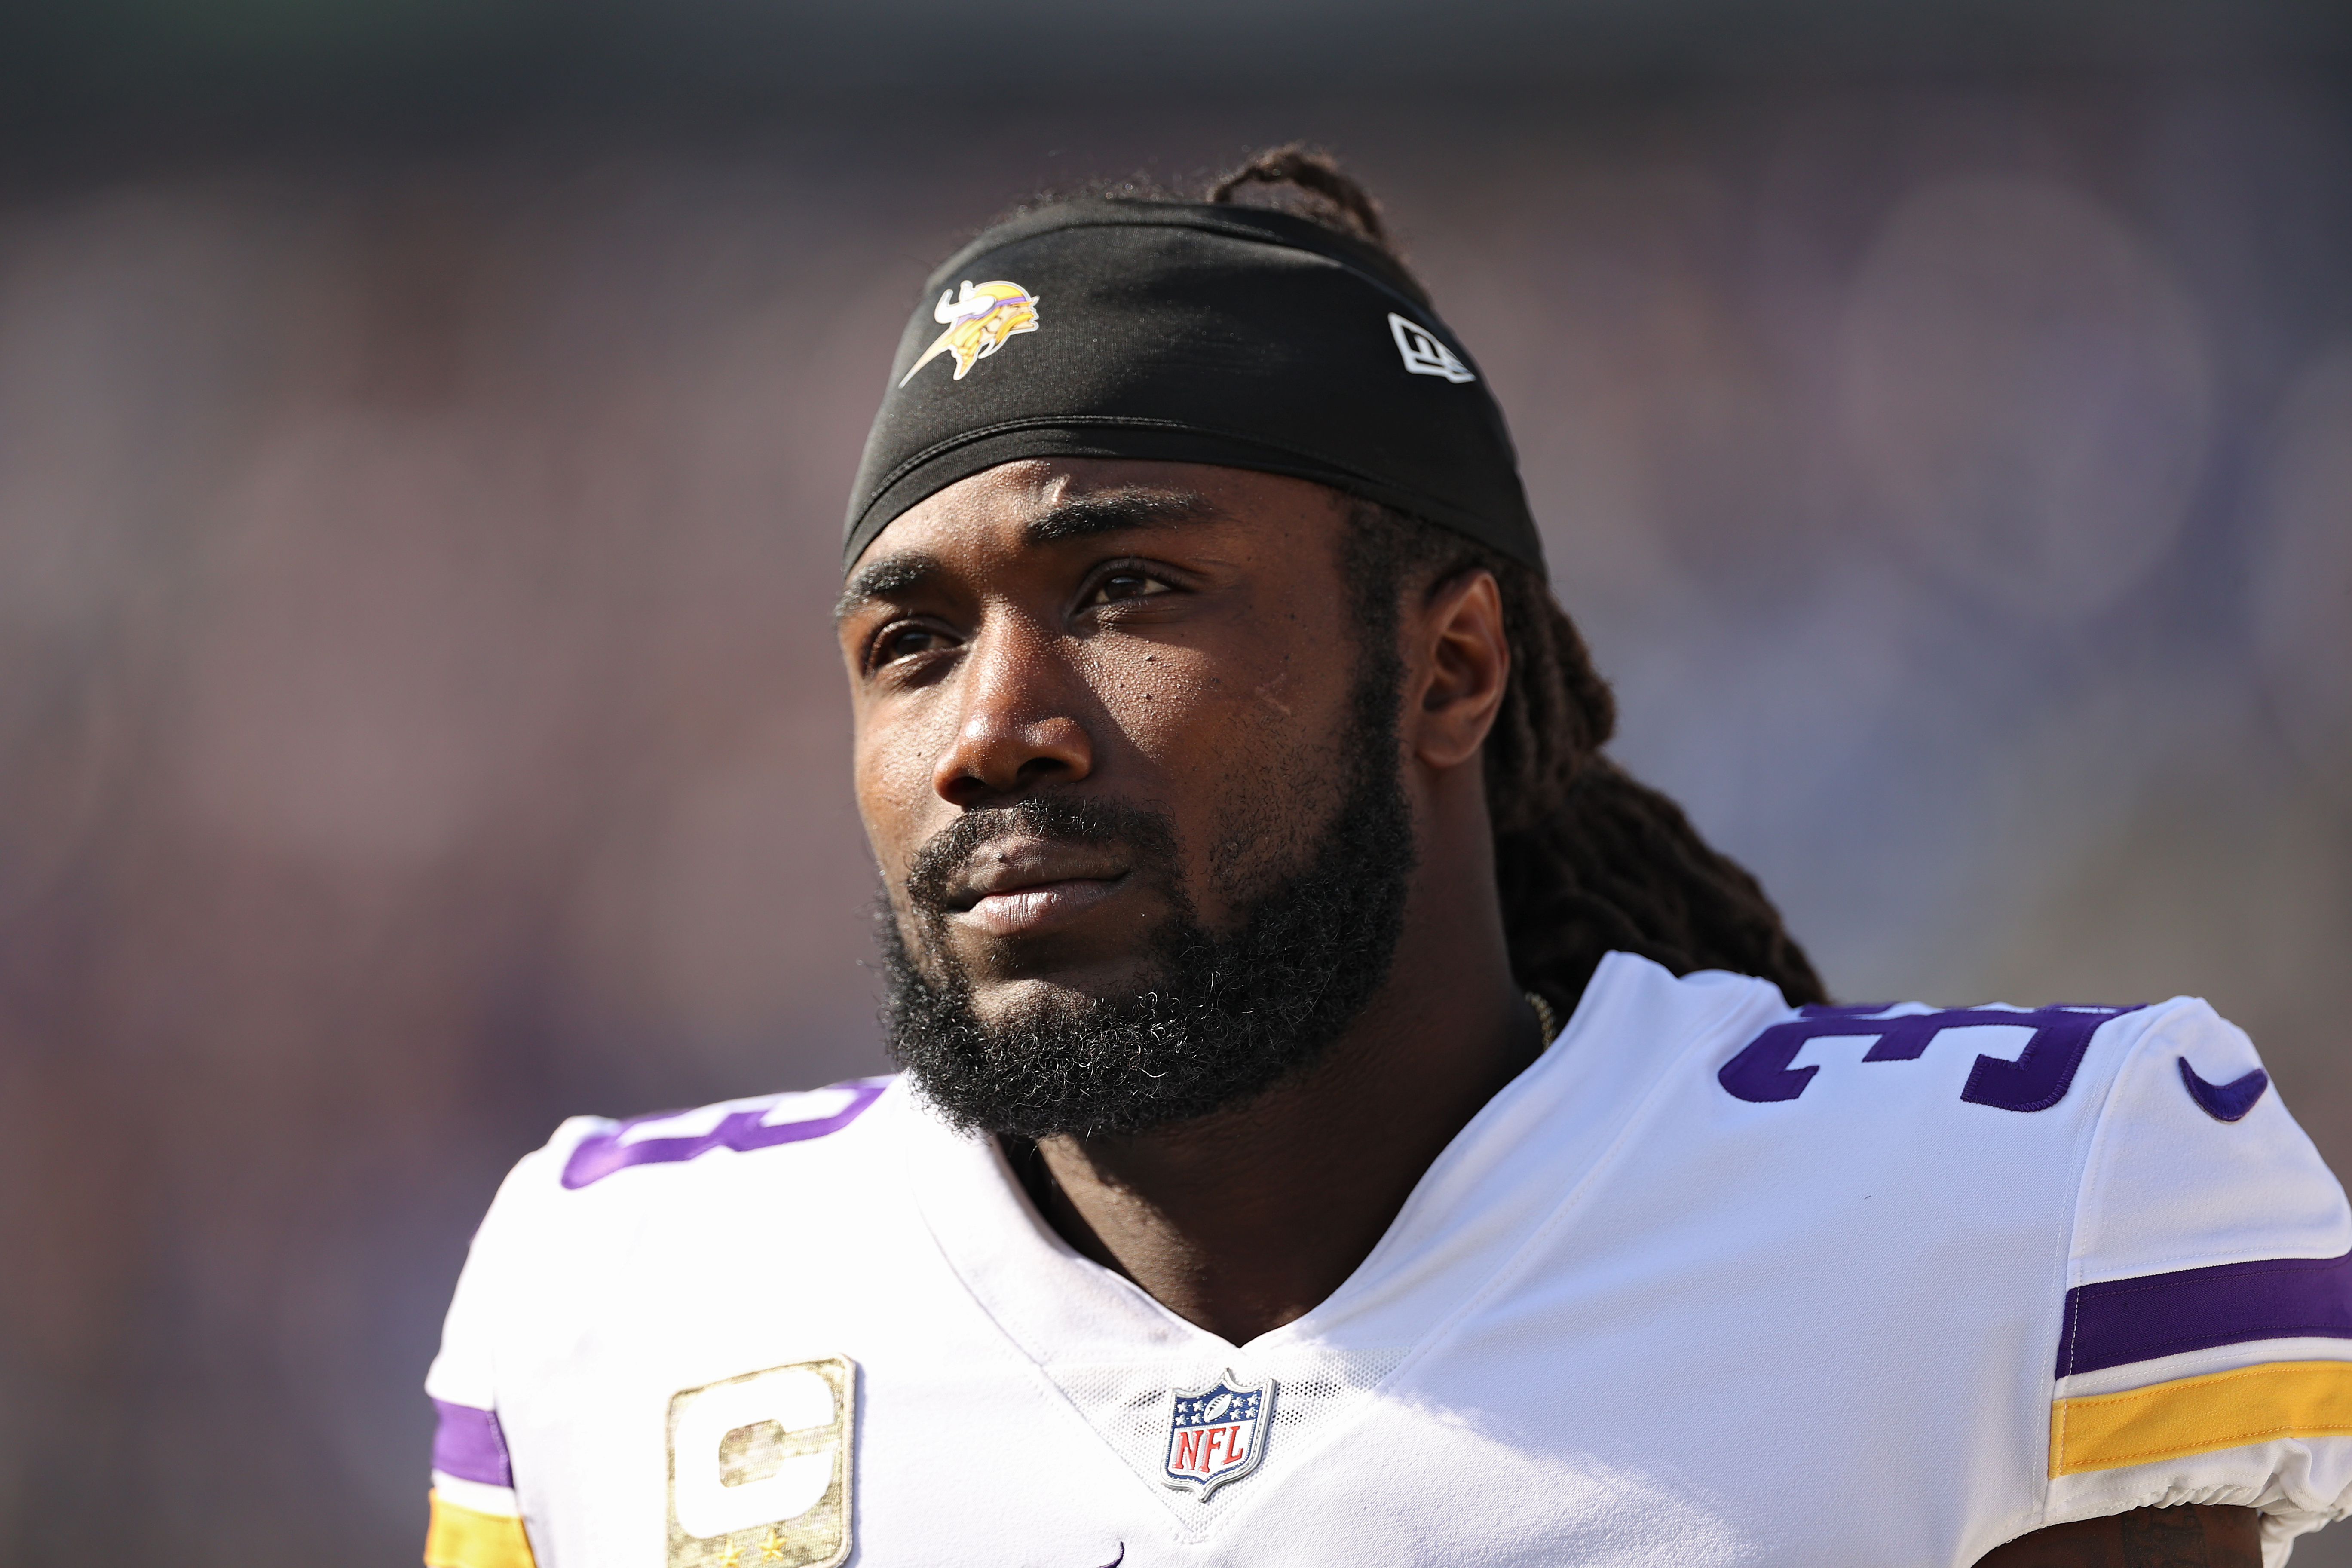 Accused of Assaulting Ex, Vikes' Cook Says She Assaulted Him